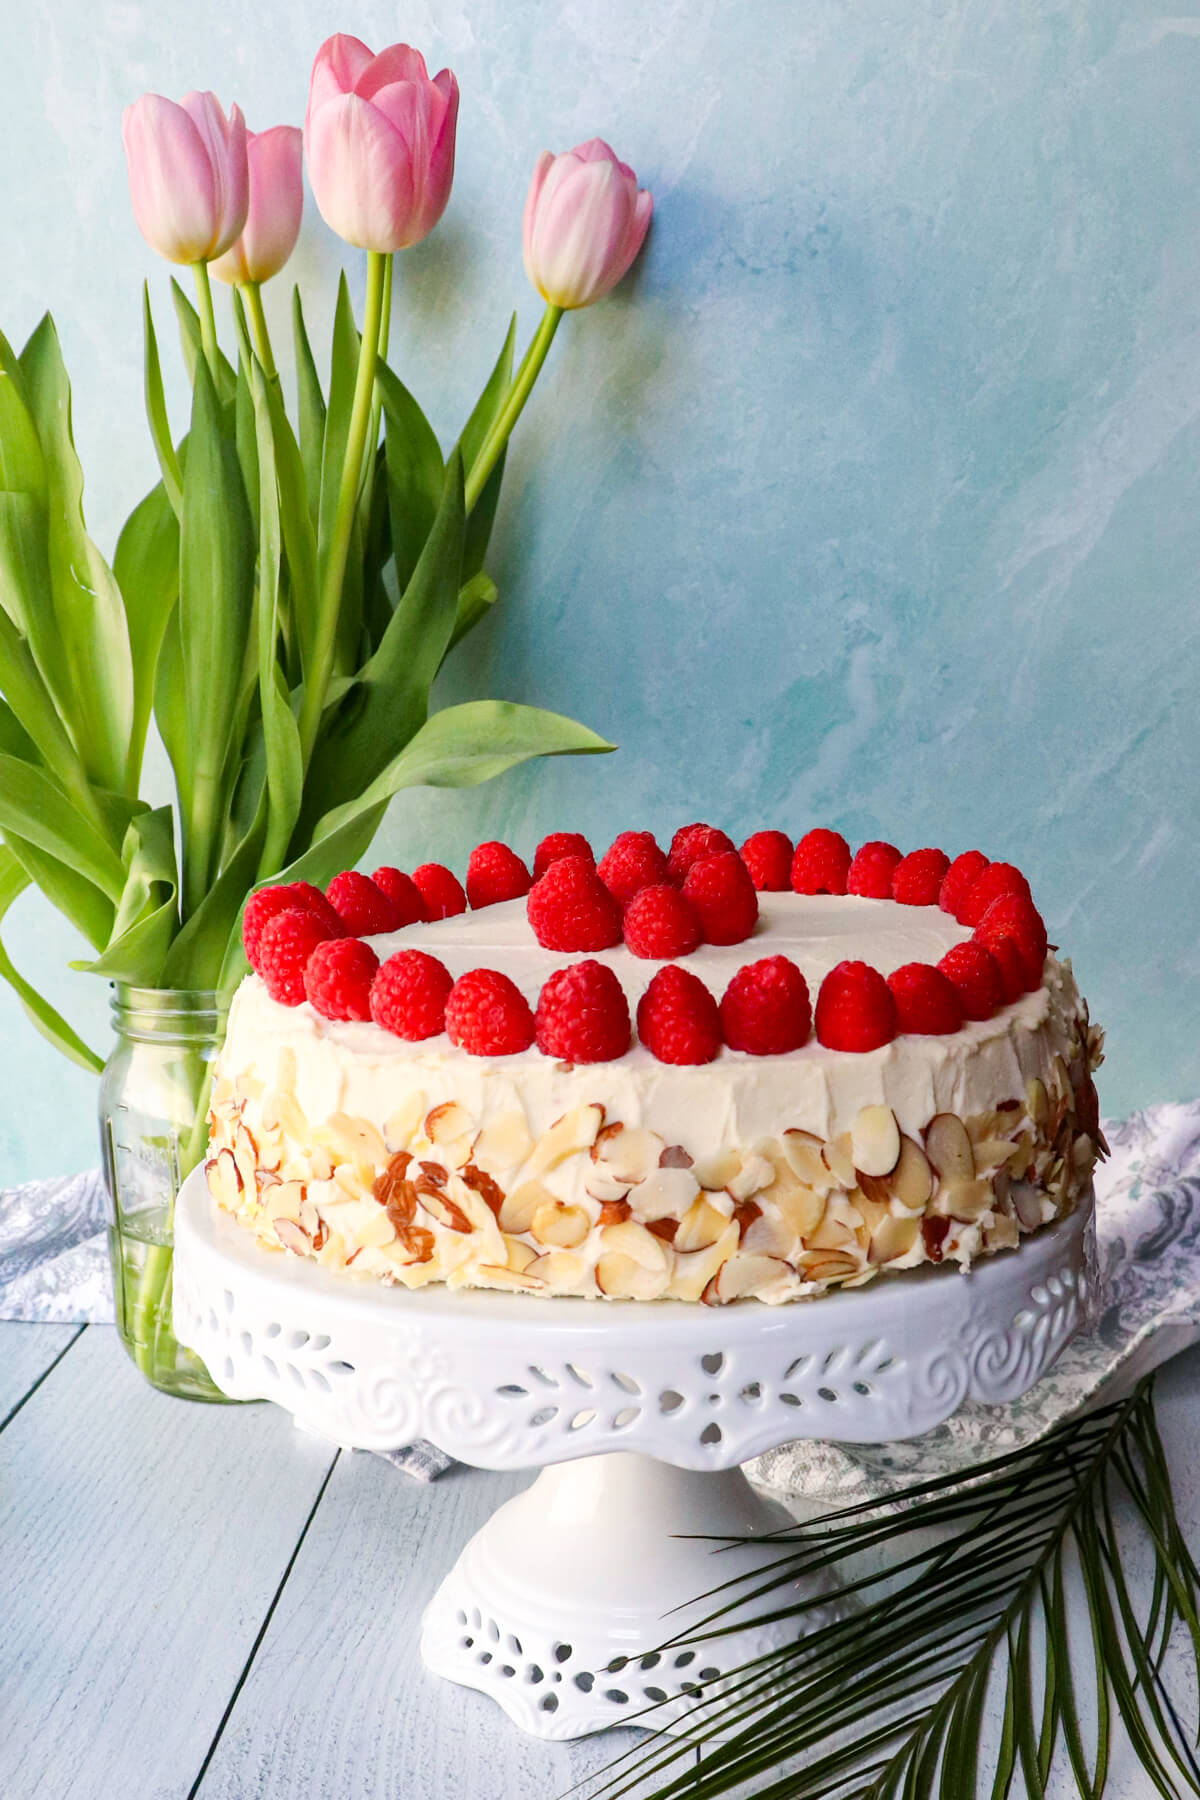 The almond raspberry keto cake box mix recipe cake on a white pedestal with pink tulips in the background